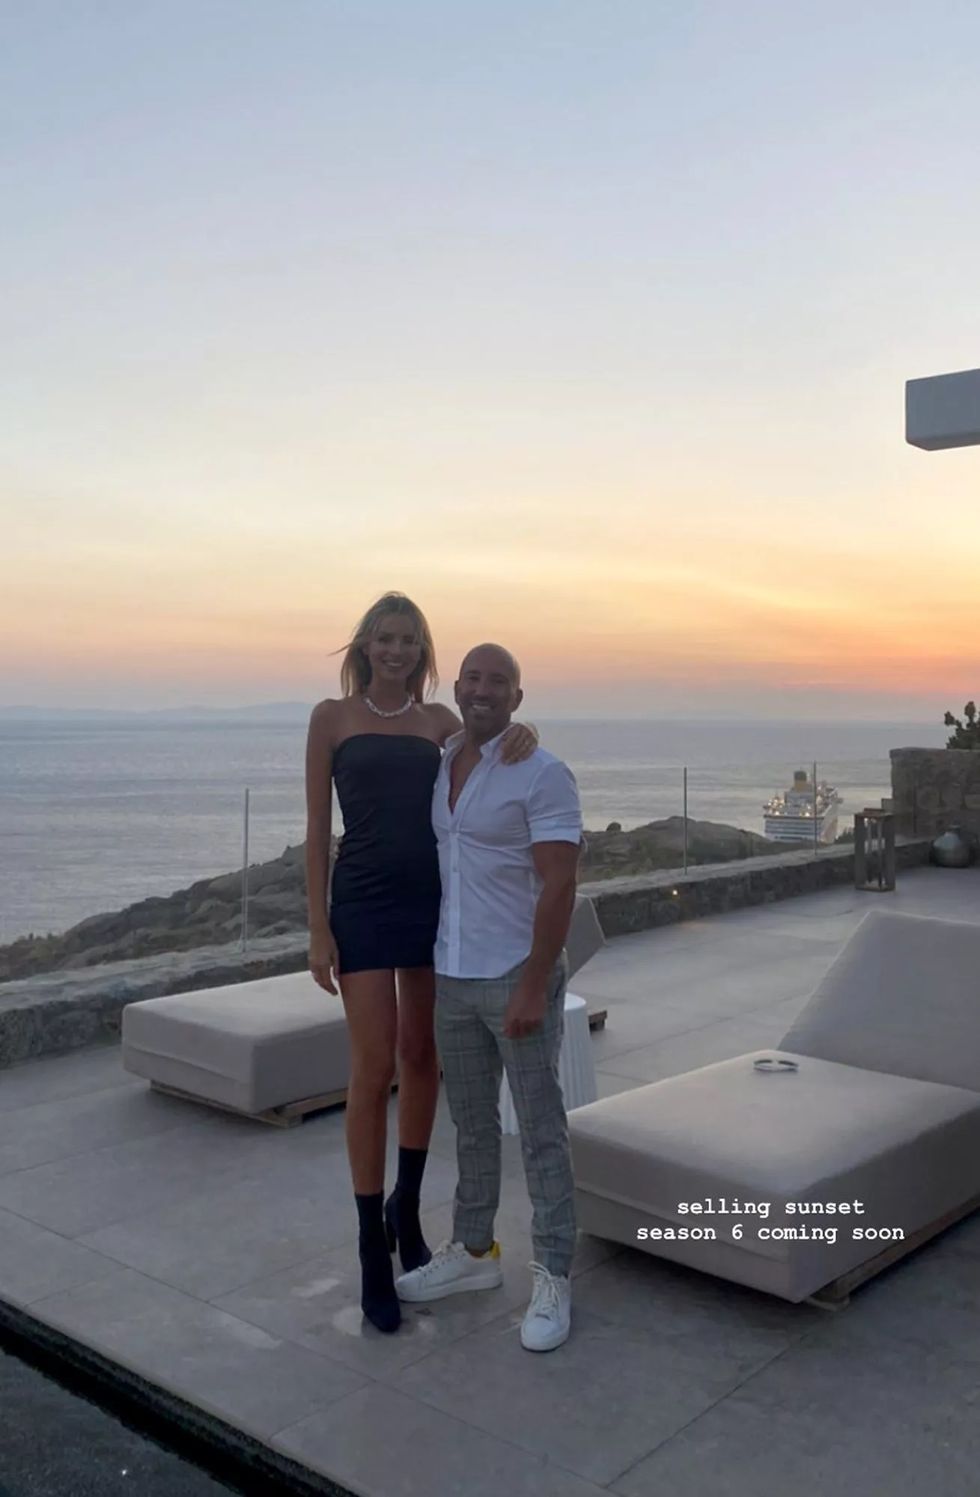 marie lou nurk and jason oppenheim in front of mykonos sunset